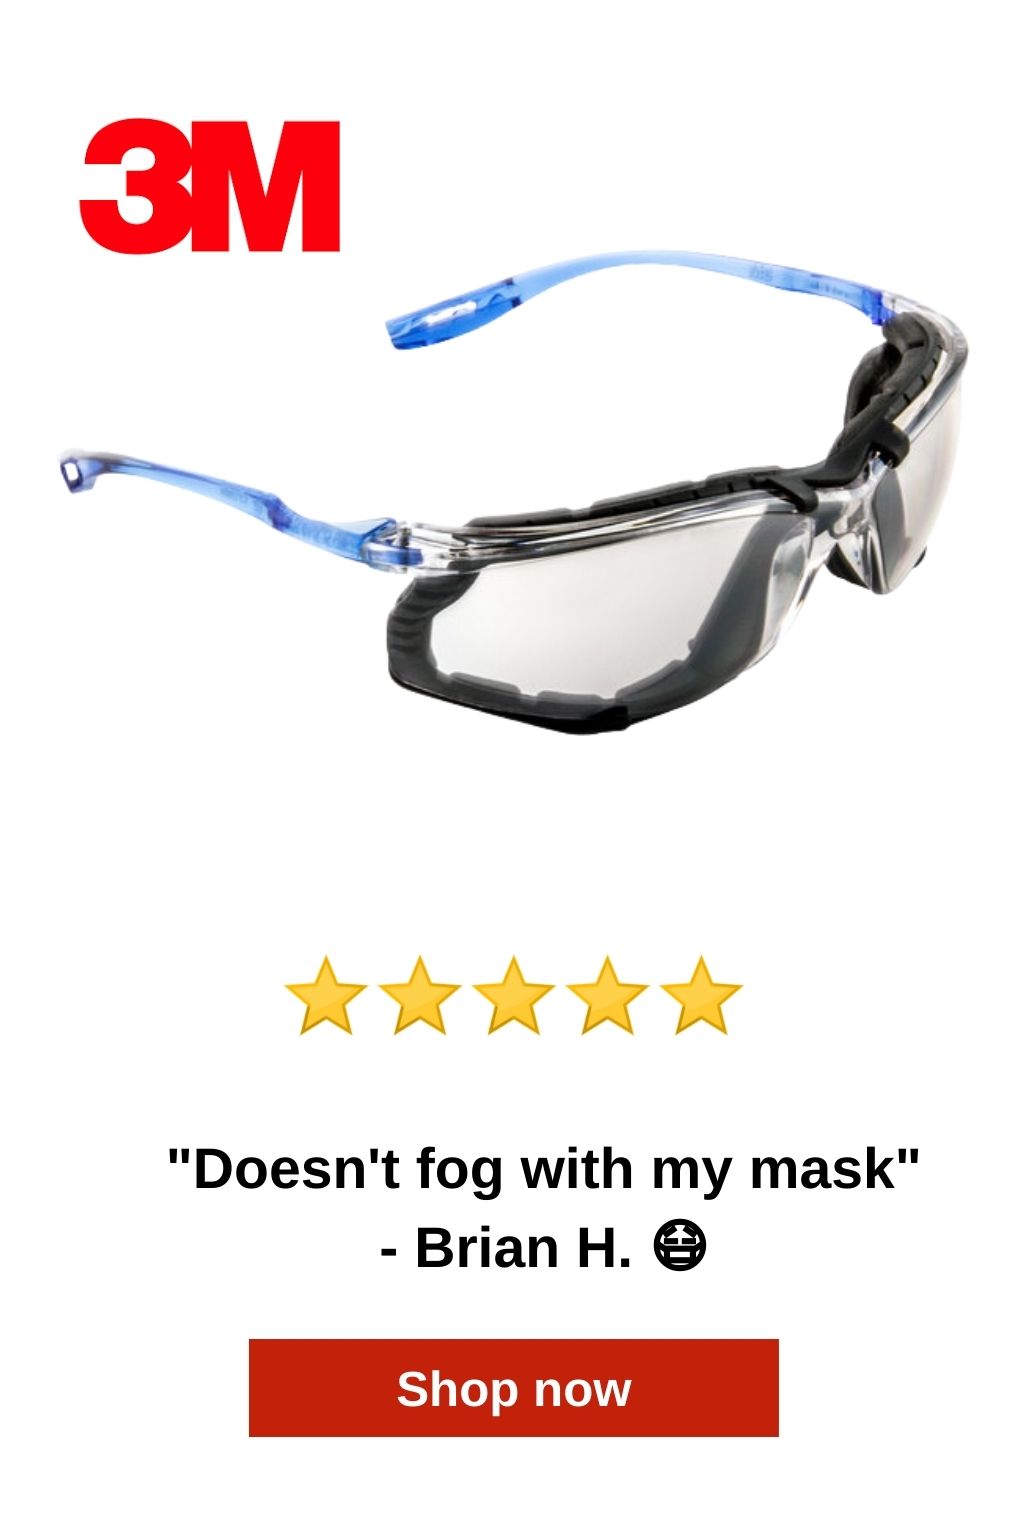 Shop 3M Safety Glasses that Wont Fog while Wearing a Mask